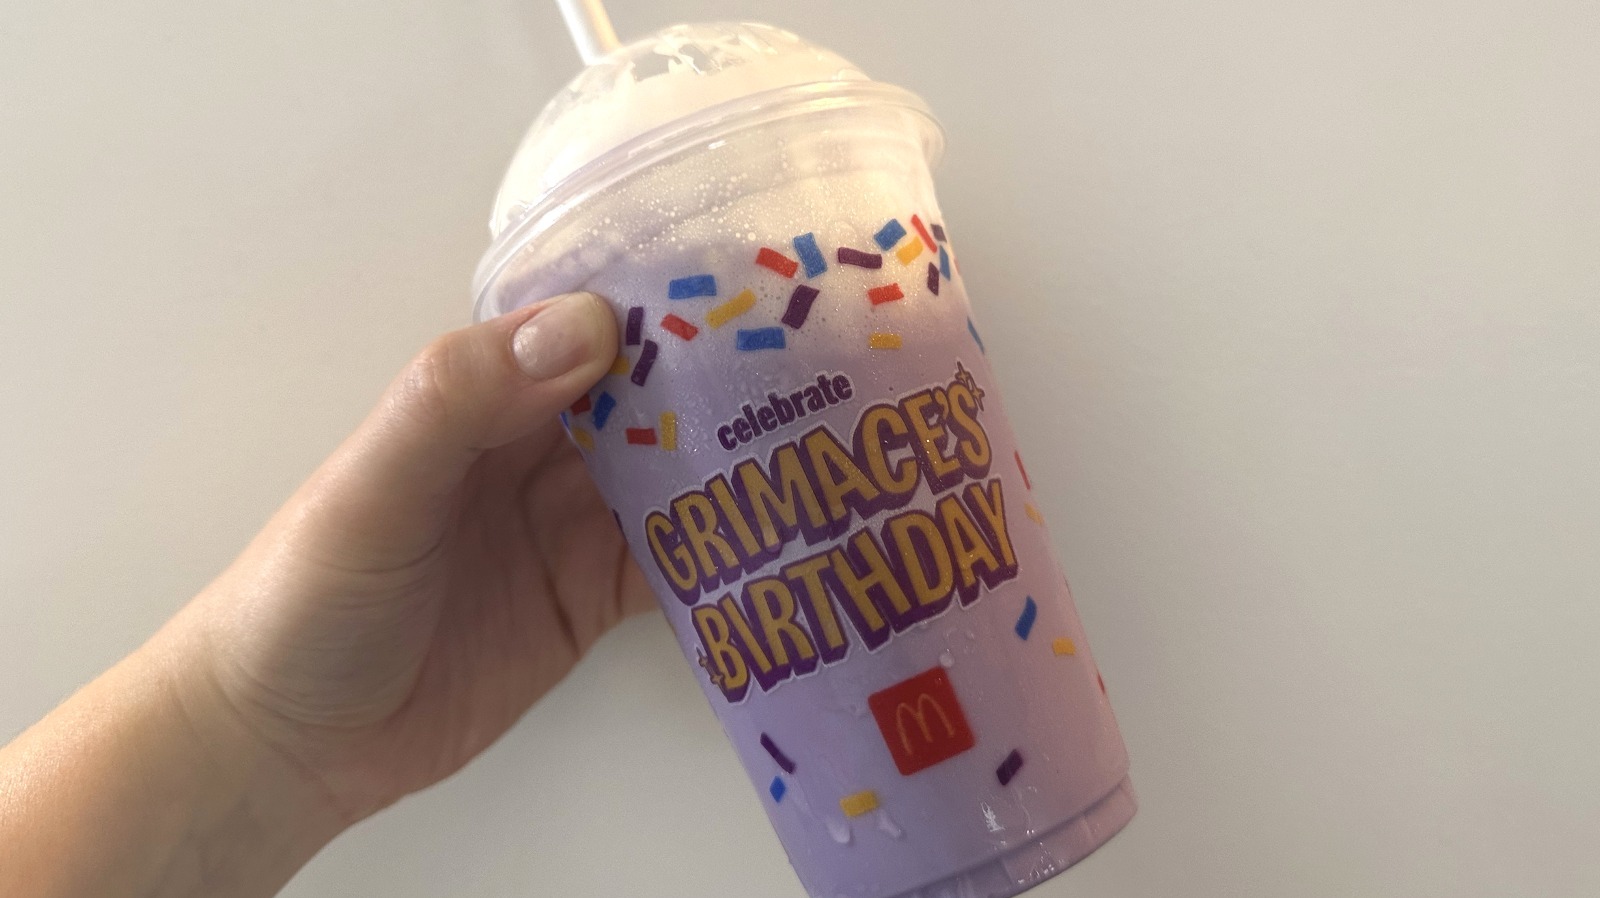 https://www.thedailymeal.com/img/gallery/mcdonalds-grimace-birthday-shake-review-it-doesnt-taste-like-berry/l-intro-1686942046.jpg